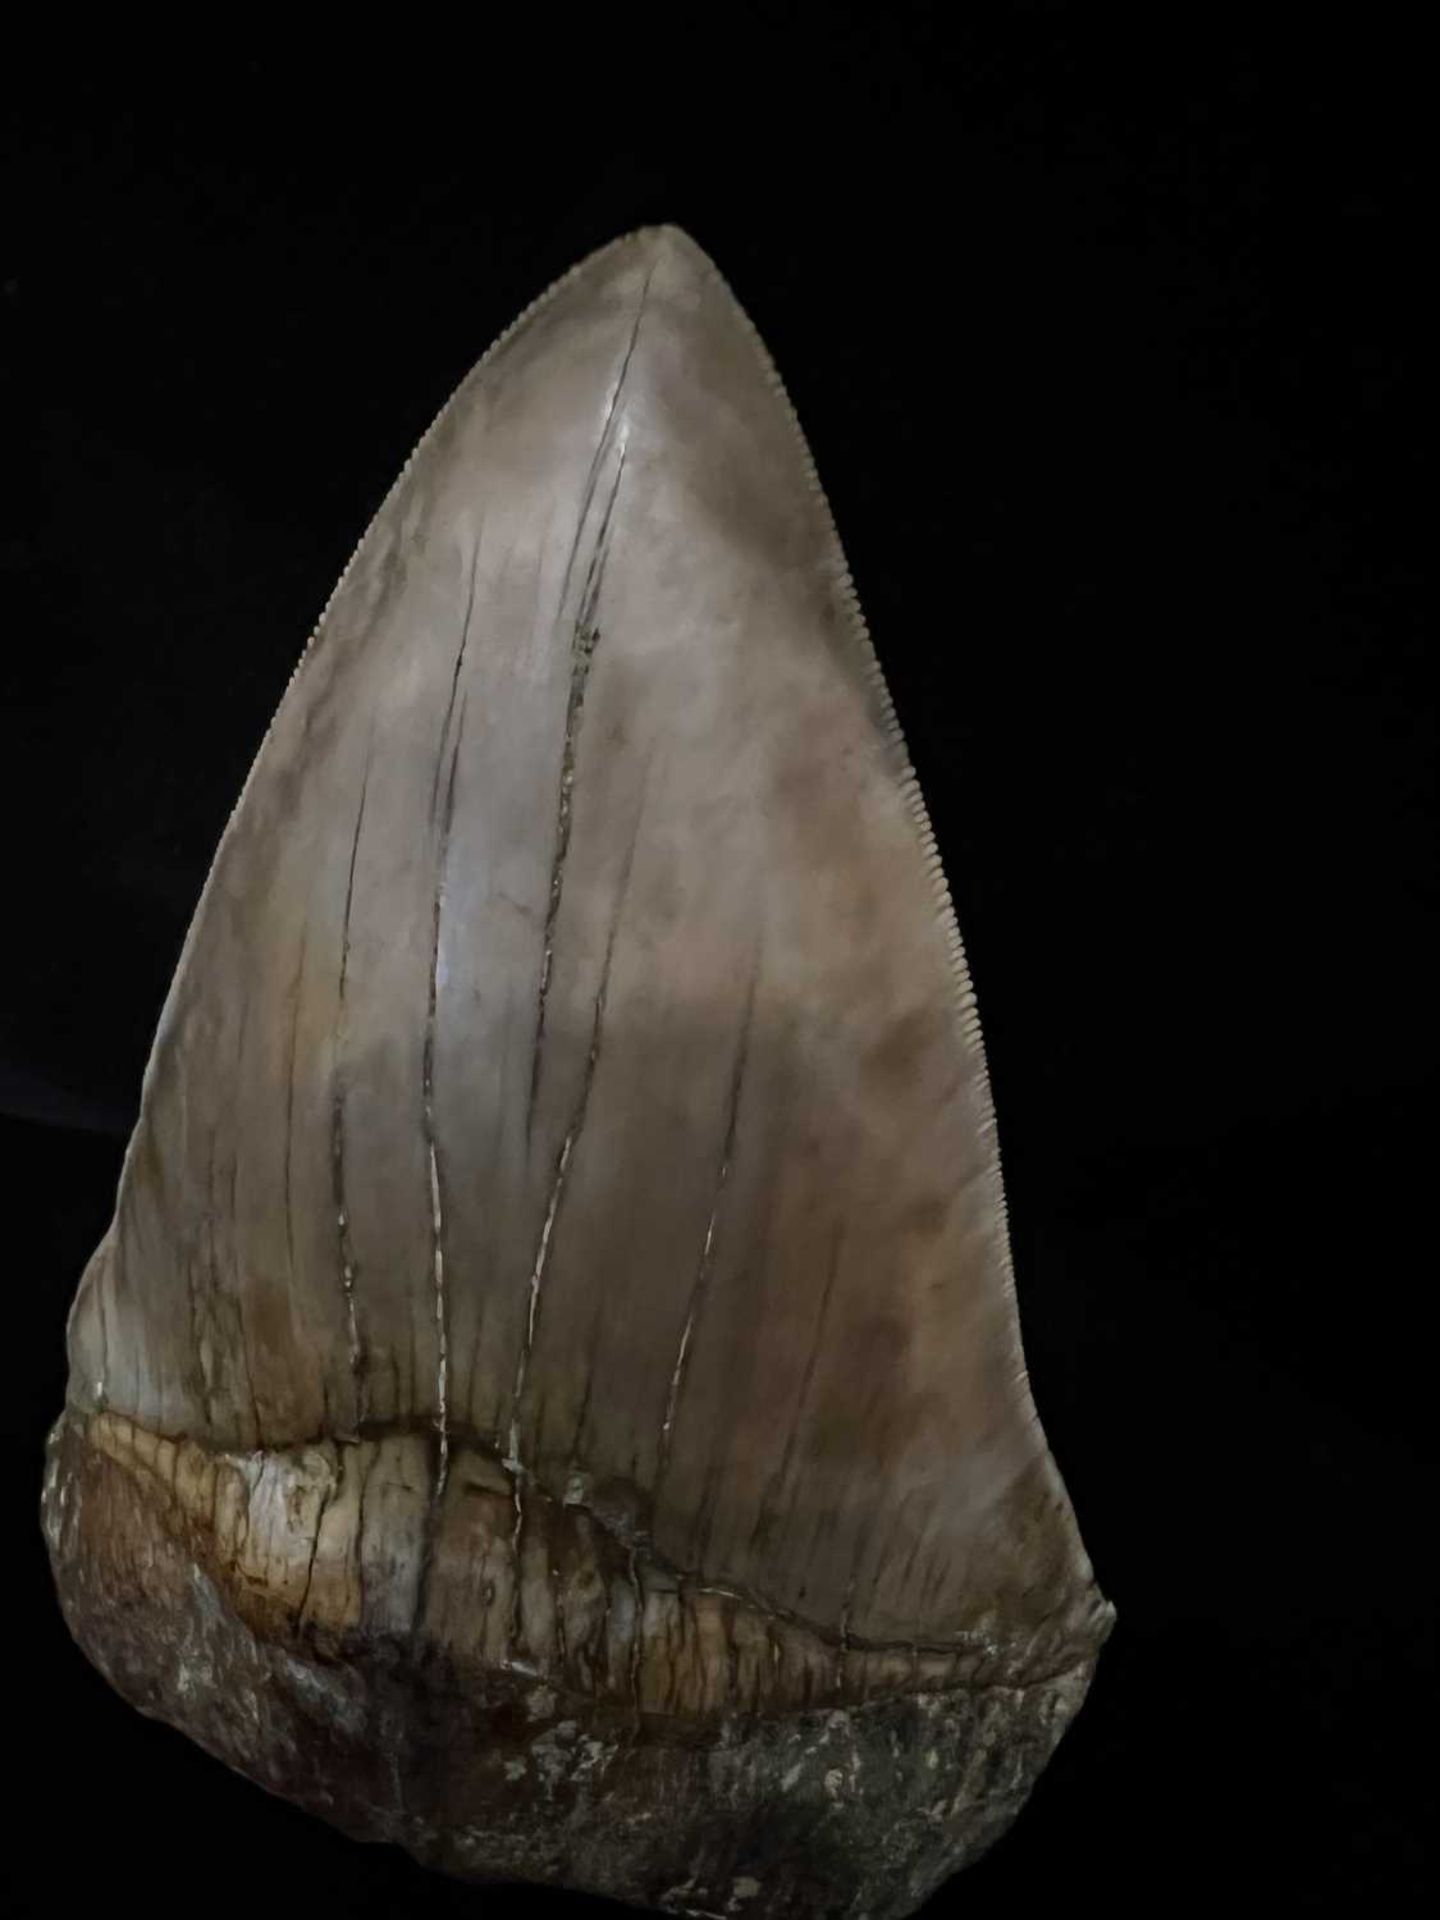 A LARGE FOSSILISED, EXTINCT MEGALODON SHARK TOOTH - Image 4 of 6